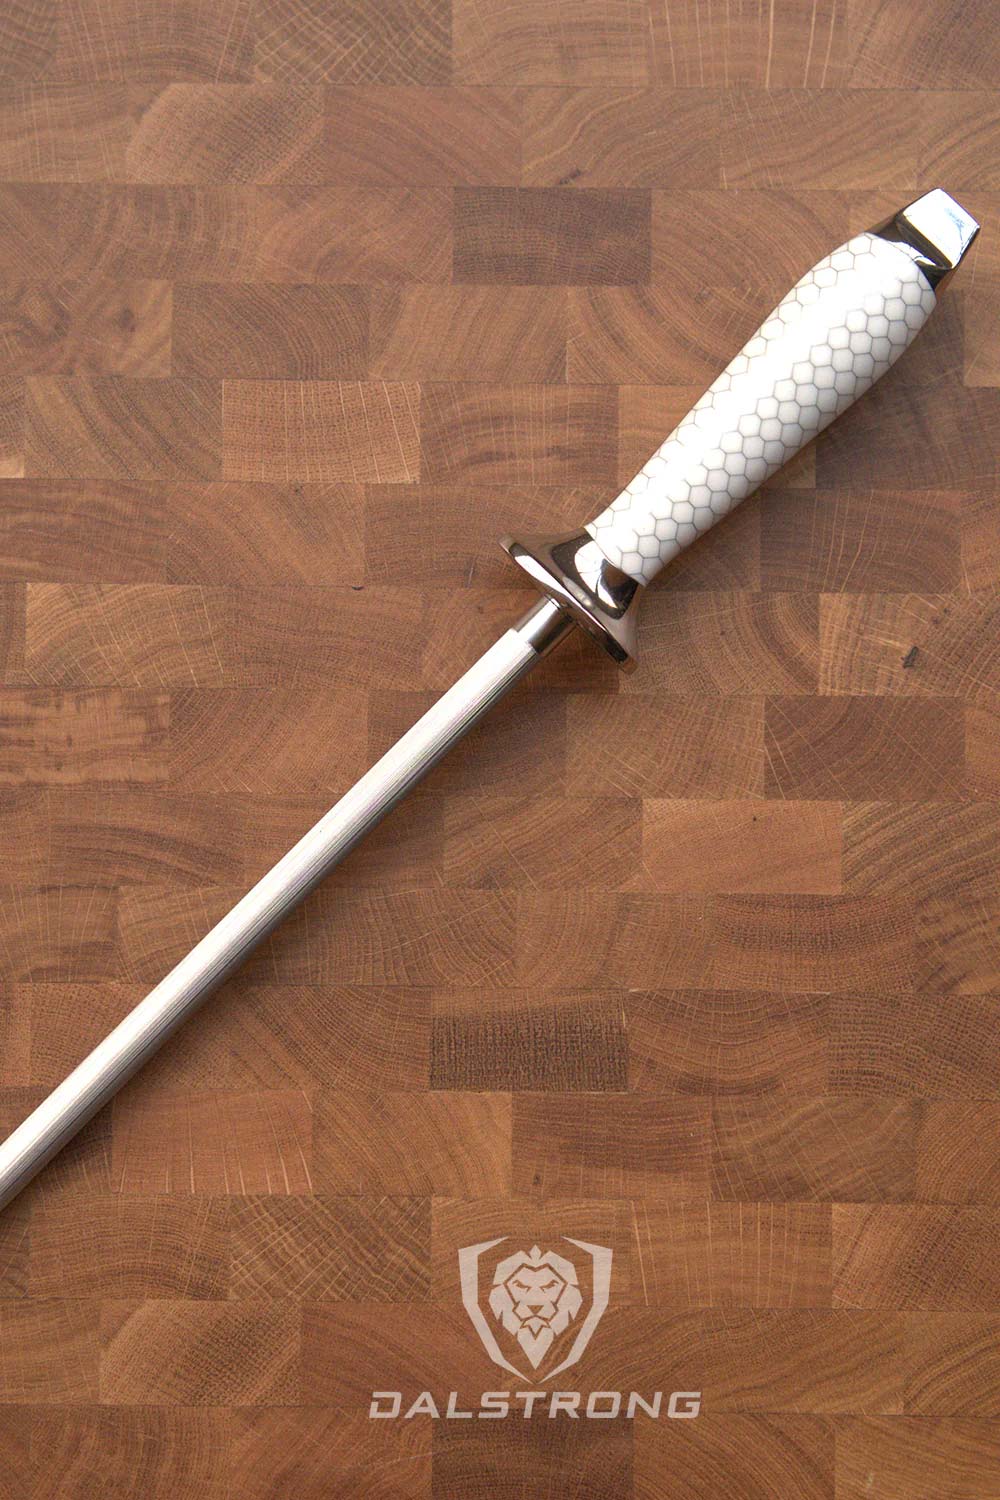 Dalstrong frost fire series 10 inch honing rod with white honeycomb handle on a cutting board.